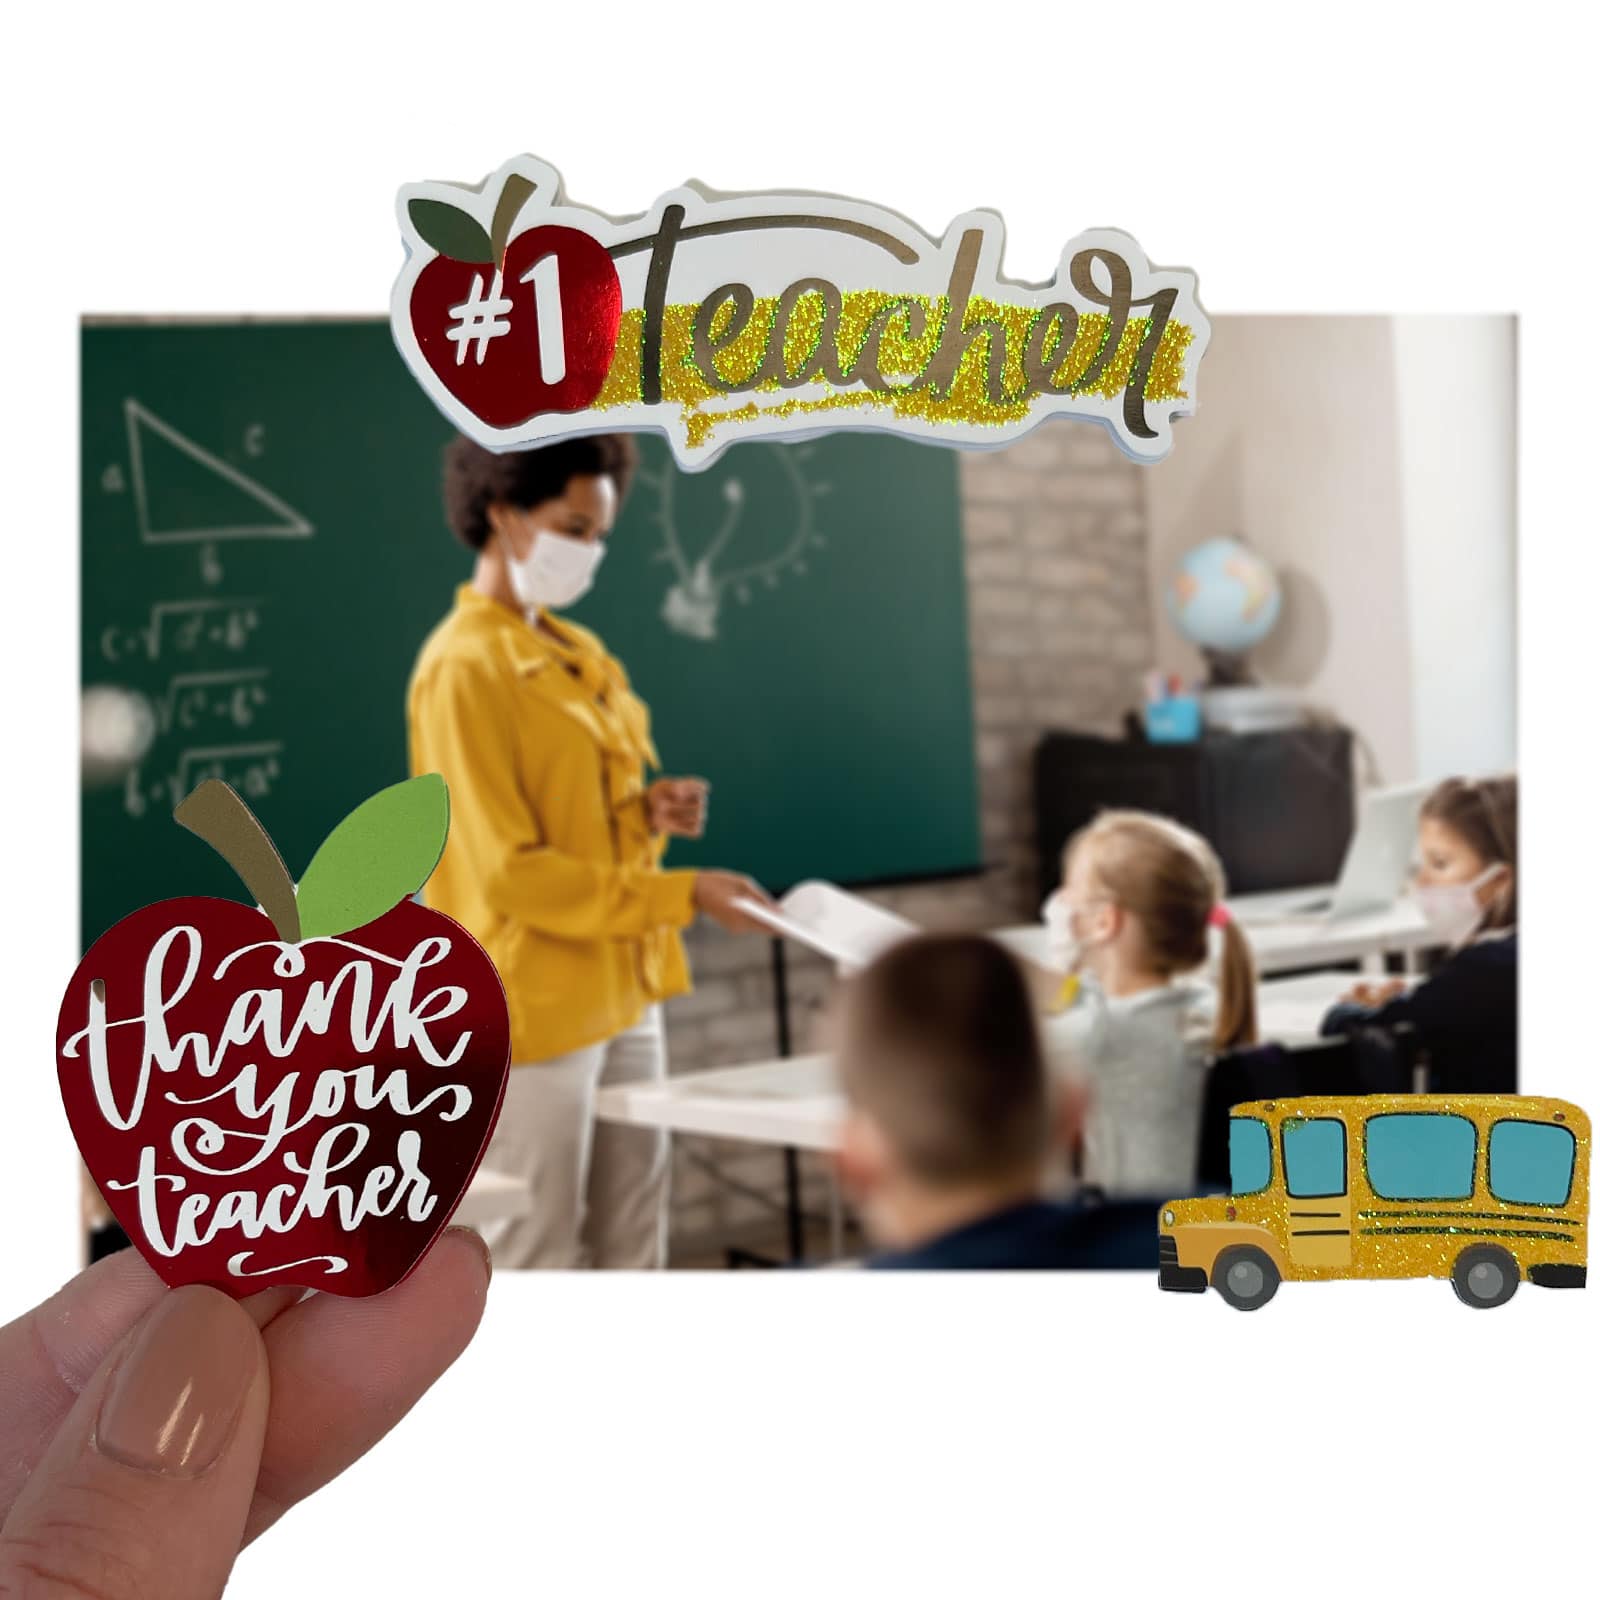 Teacher Stickers by Recollections™